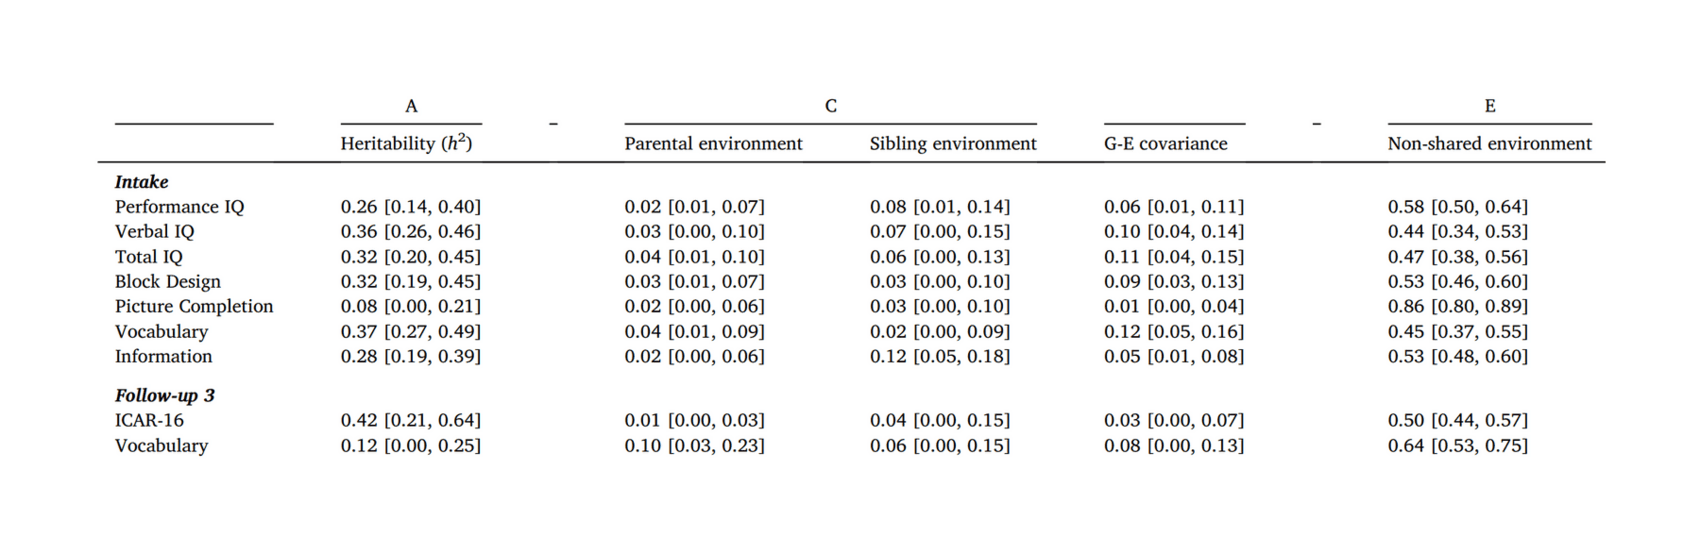 Table 3: Decomposition of variance [95% CI] for each measure and subtest of cognitive ability. Note: 95% CIs are computed from each parameter’s 200 bootstrap iterations (Efron & Tibshirani 1993) for each scale. Non-shared environment is computed by subtracting the heritability, parental environment, sibling environment, and gene-environment (G-E) covariance from 1. For full parameter estimates, see SI Table S12. Column values add up to 1, total phenotypic variance.